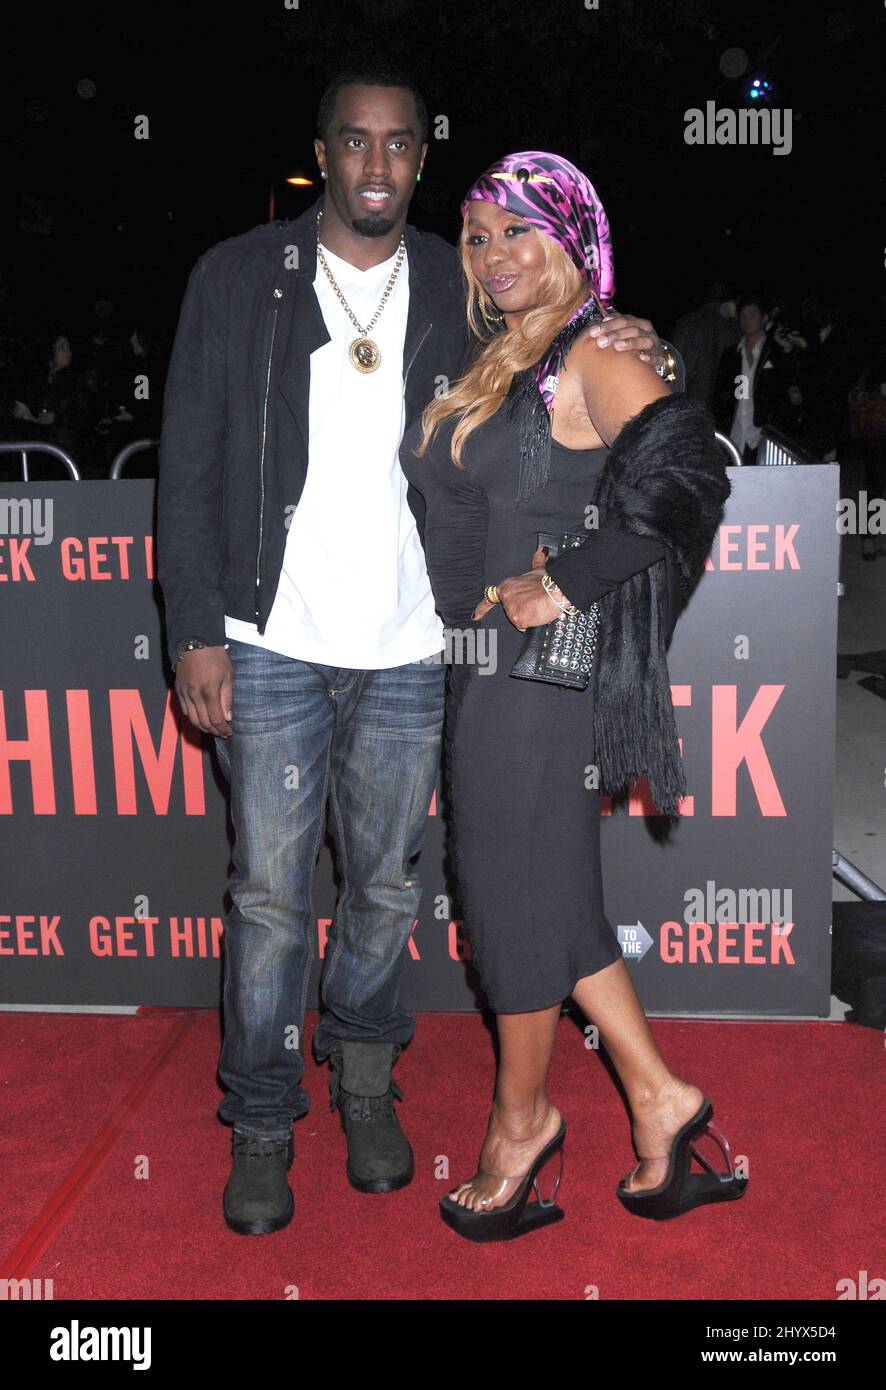 Sean Combs and Janice Combs during the World Premiere of 'Get Him To The Greek' at The Greek Theatre, Los Angeles, California Stock Photo